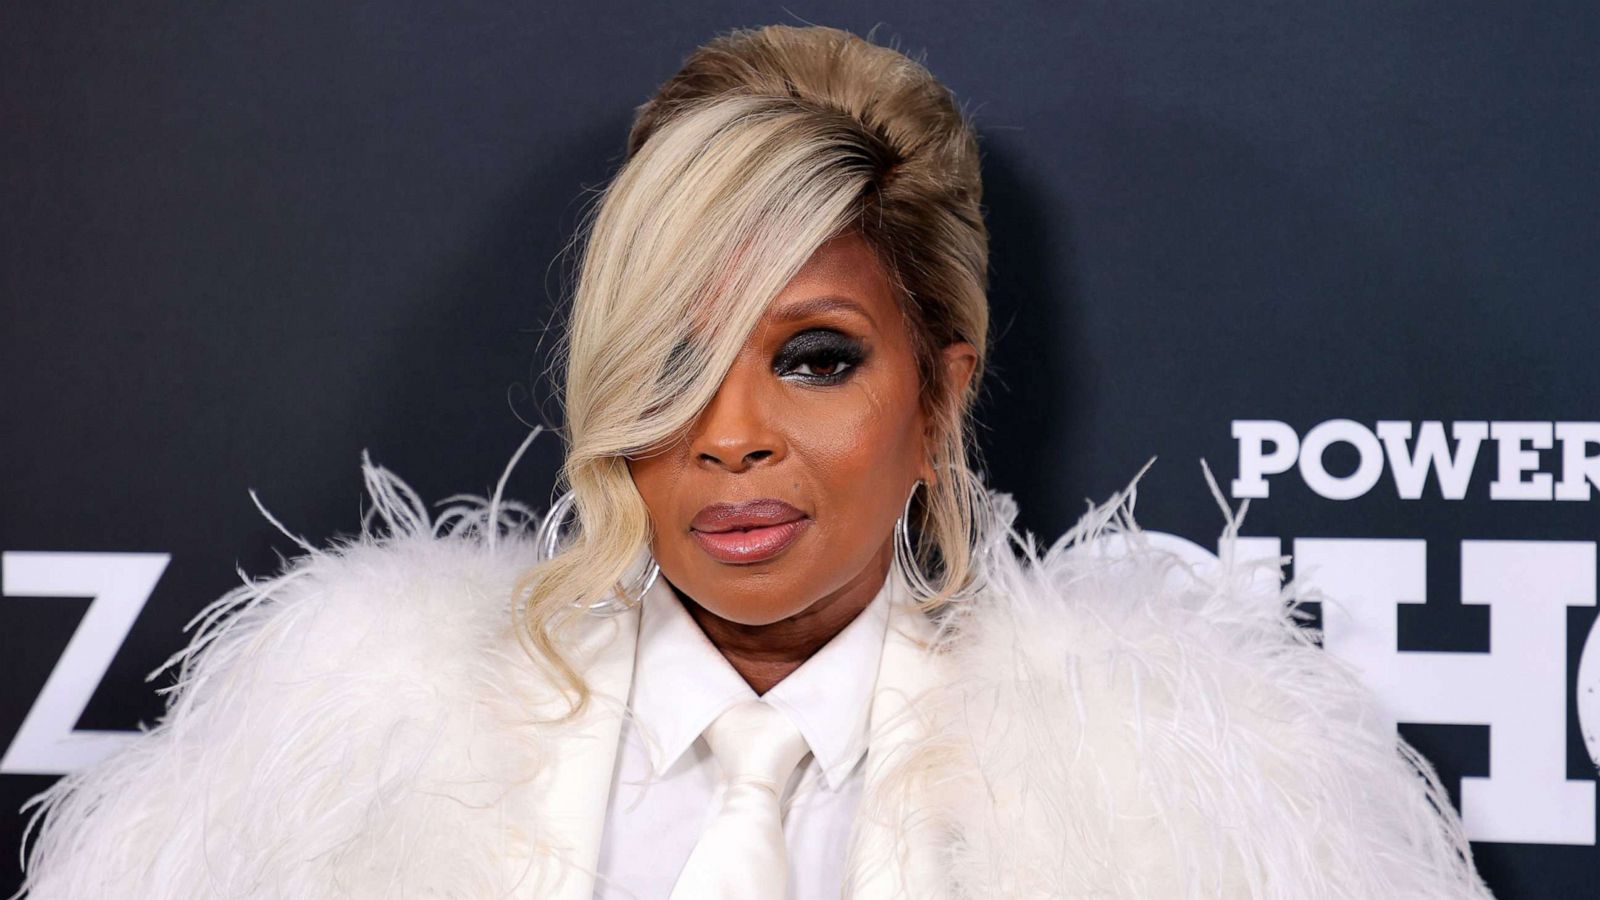 Mary J. Blige - Songs, Albums & Age